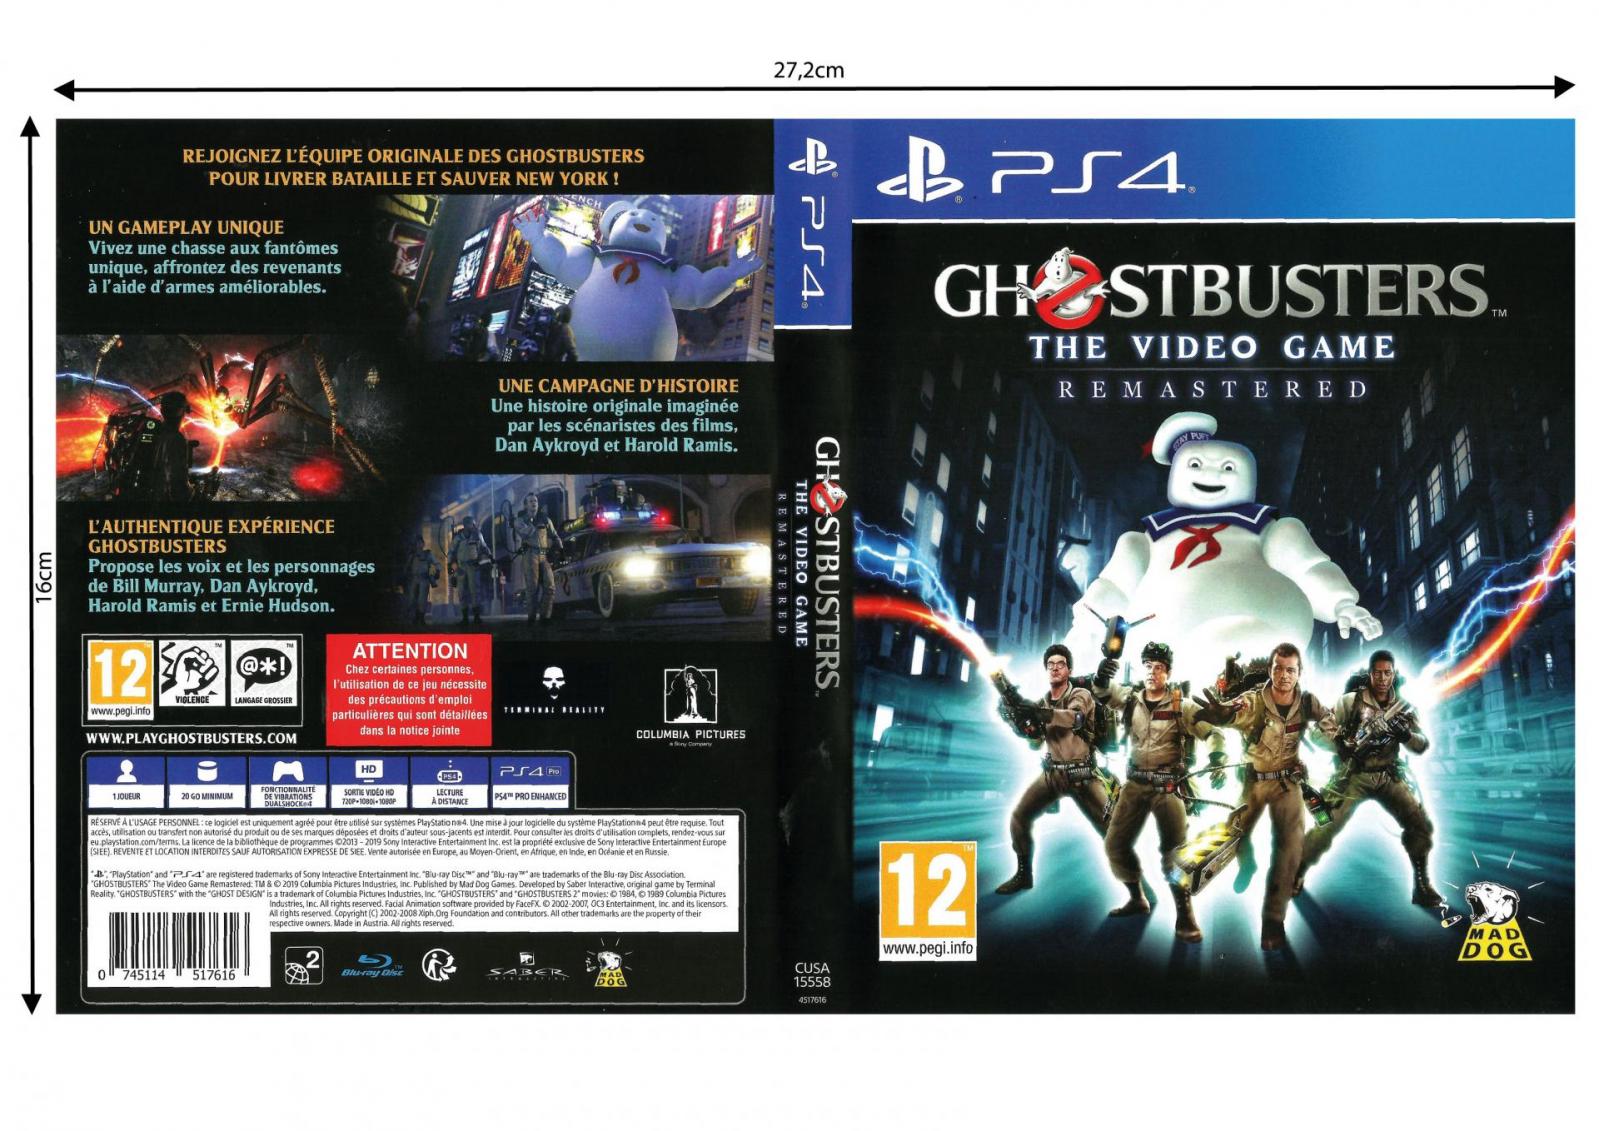 Ghostbusters the video game 02